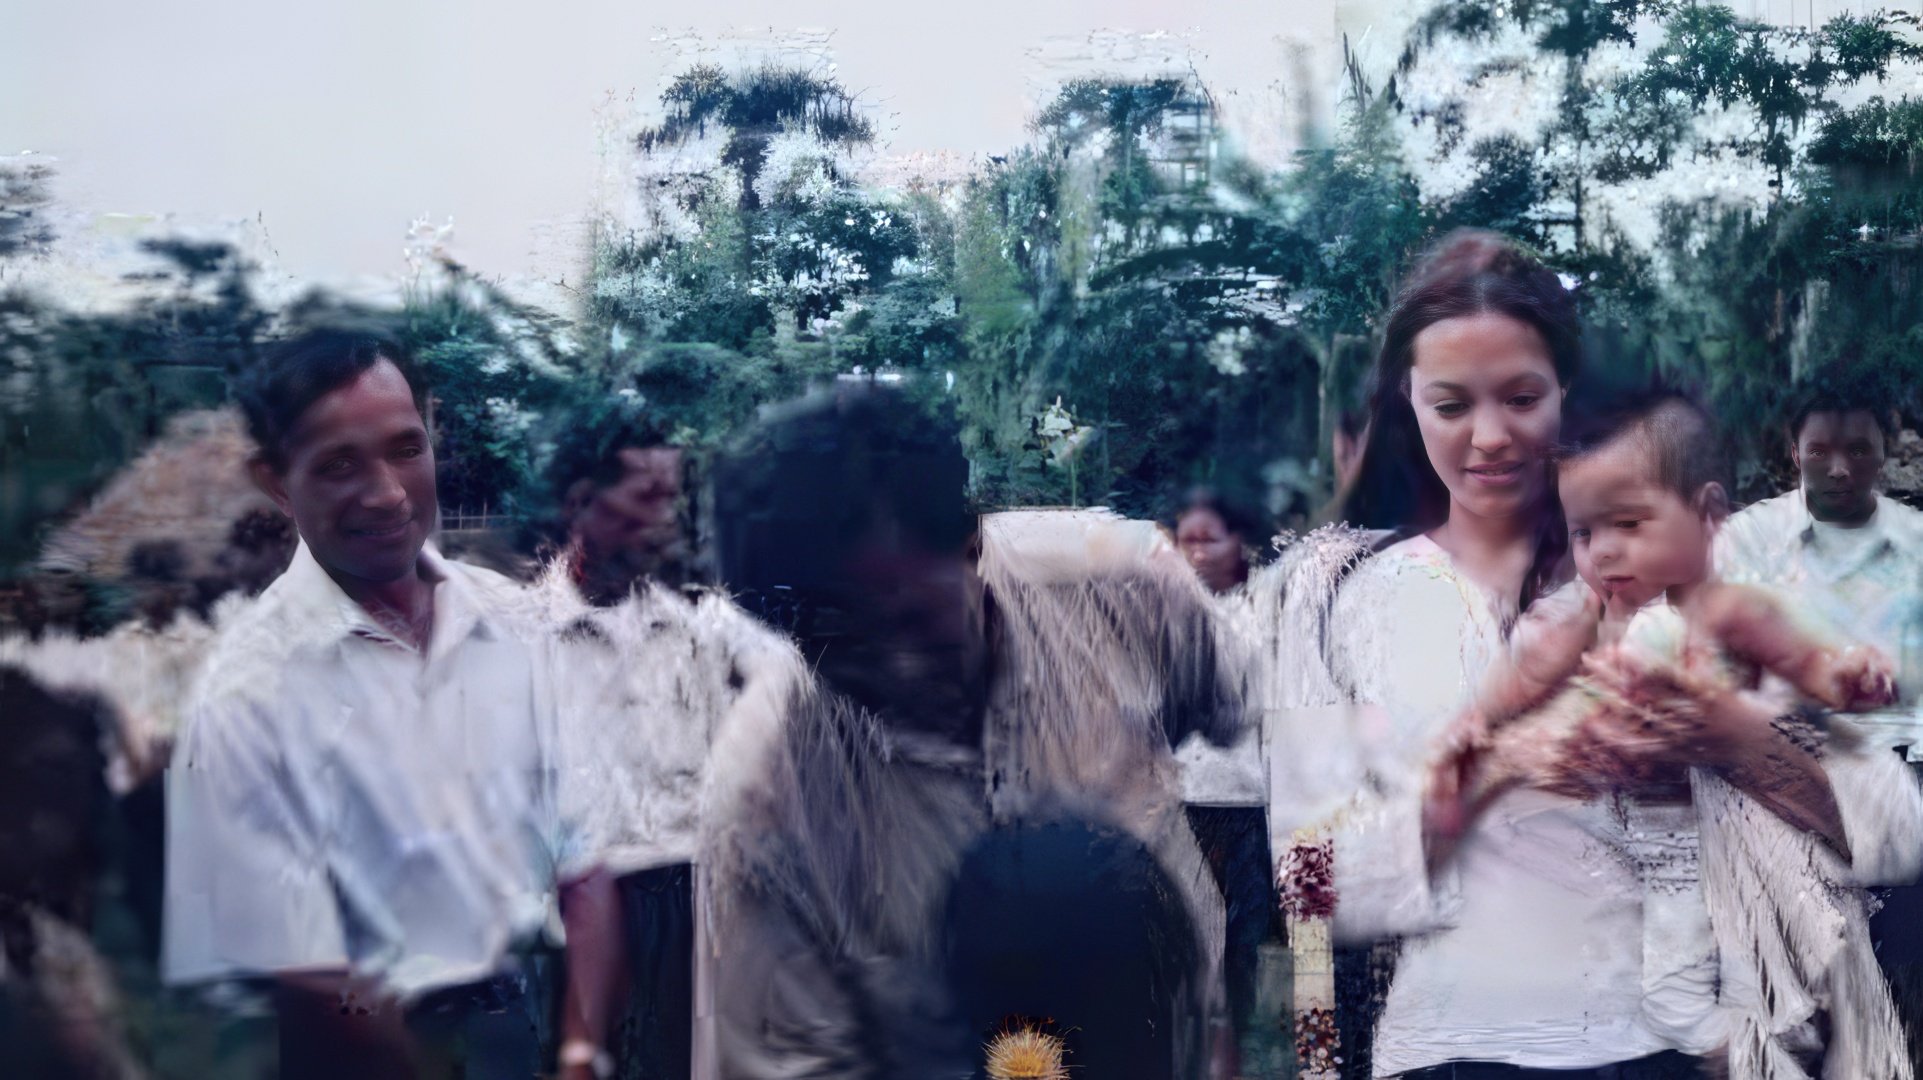 In 2001, Jolie became involved in public activities